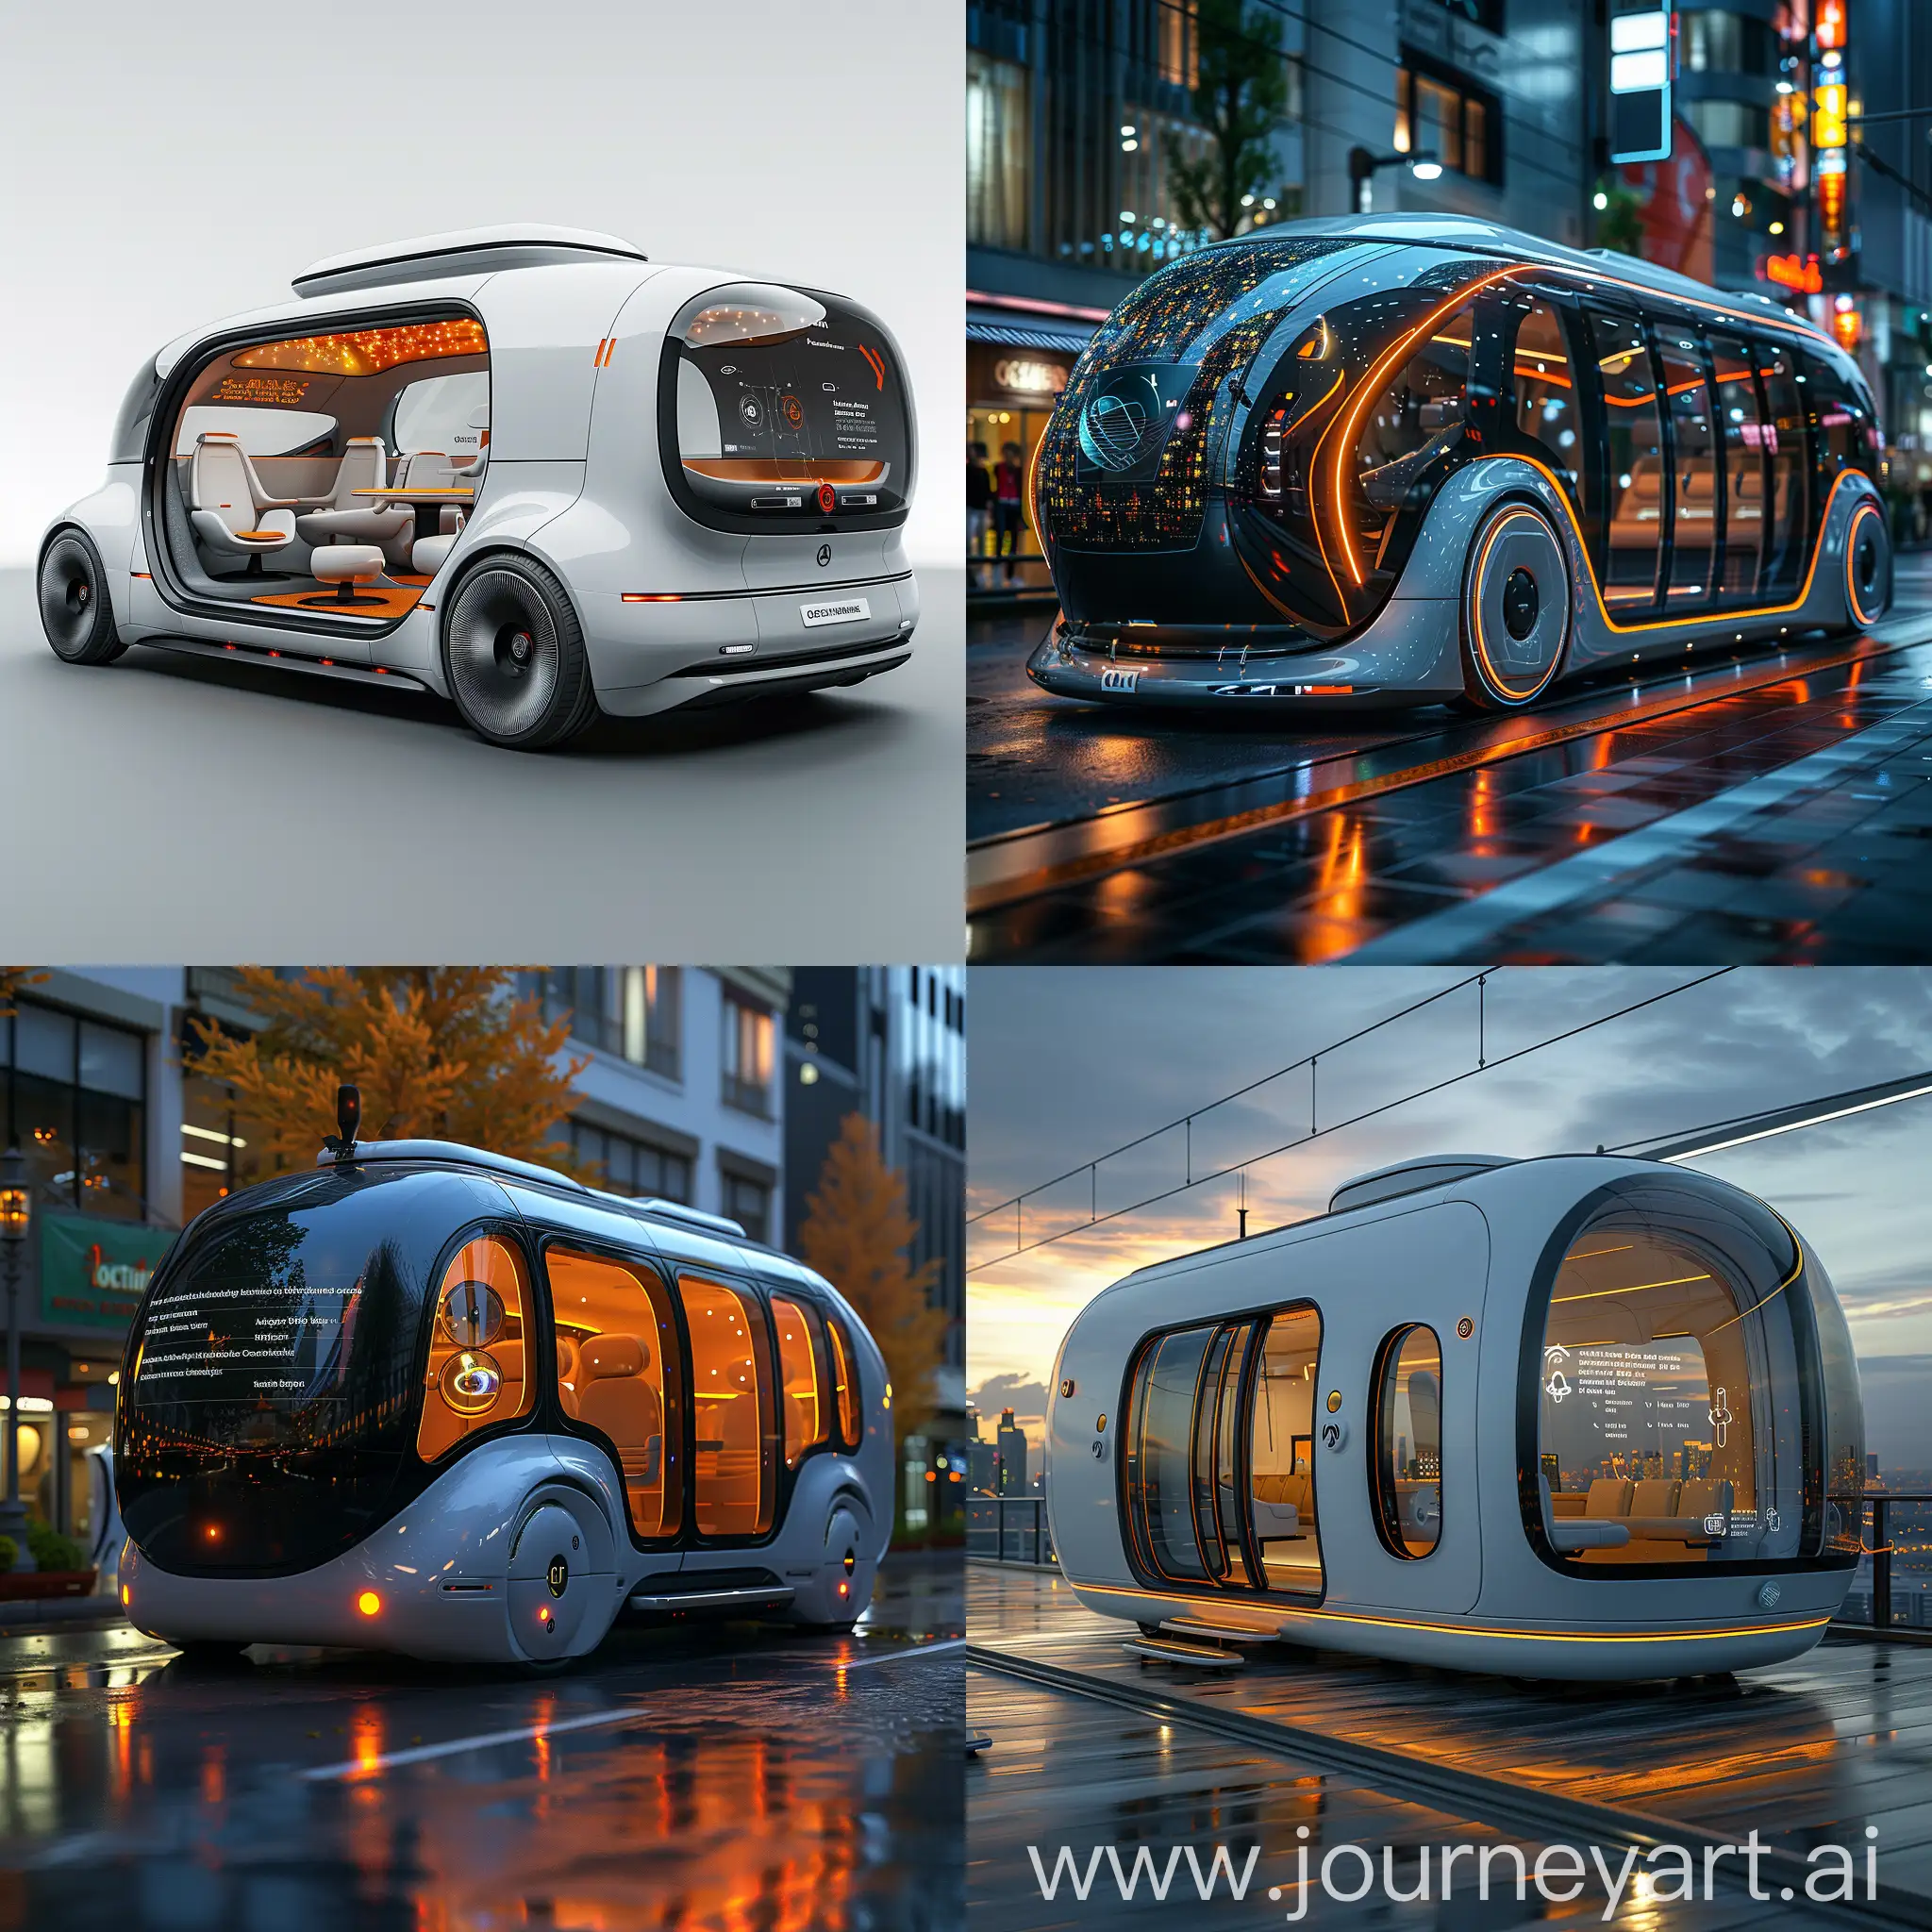 Futuristic-Microbus-with-Autonomous-Driving-and-Holographic-Displays